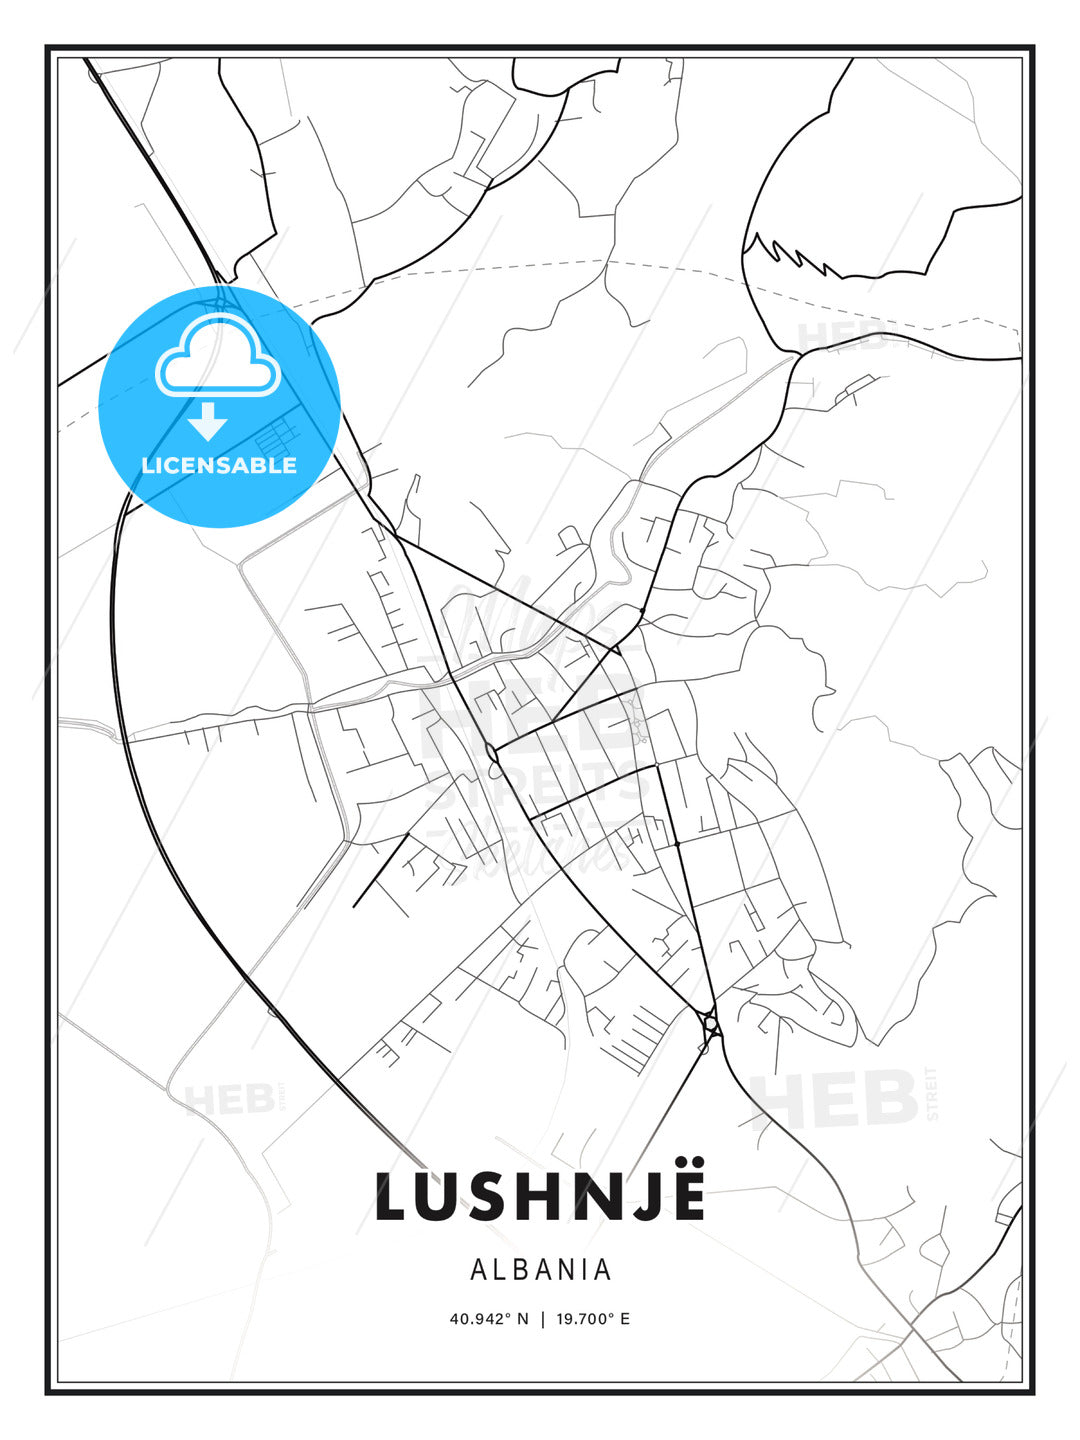 Lushnjë, Albania, Modern Print Template in Various Formats - HEBSTREITS Sketches